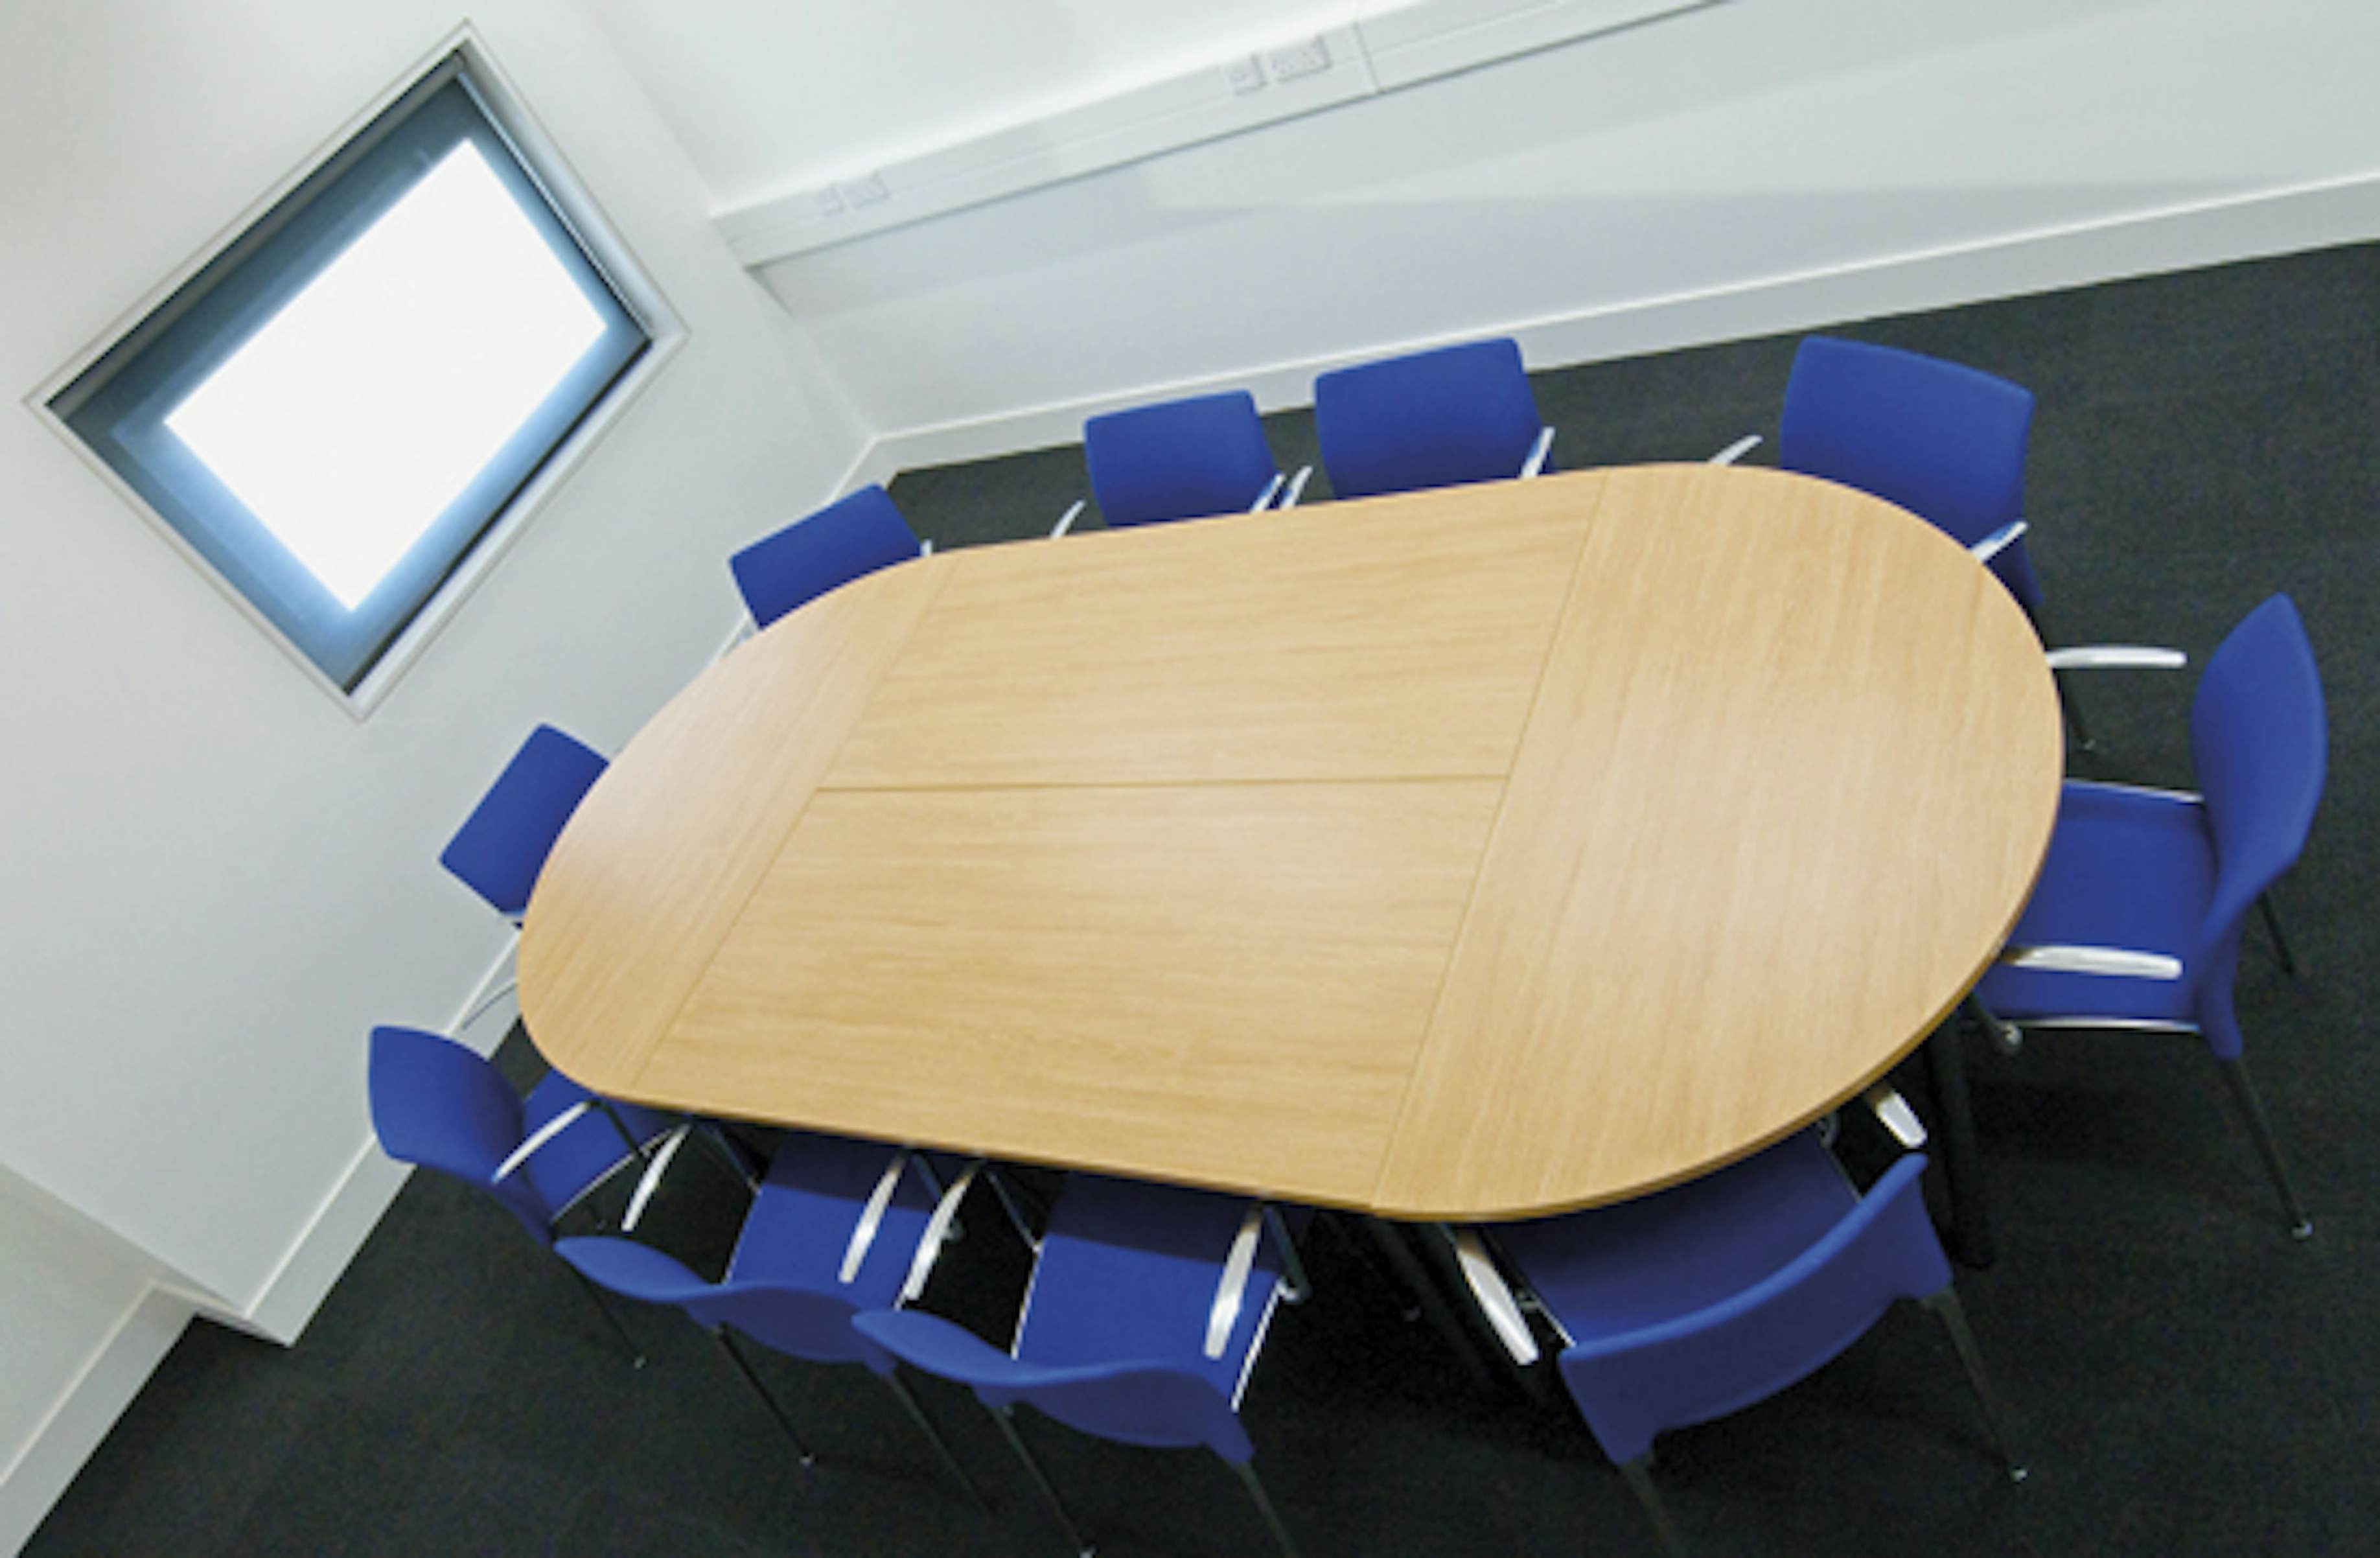 The Tomlinson Centre - Meeting rooms  image 1